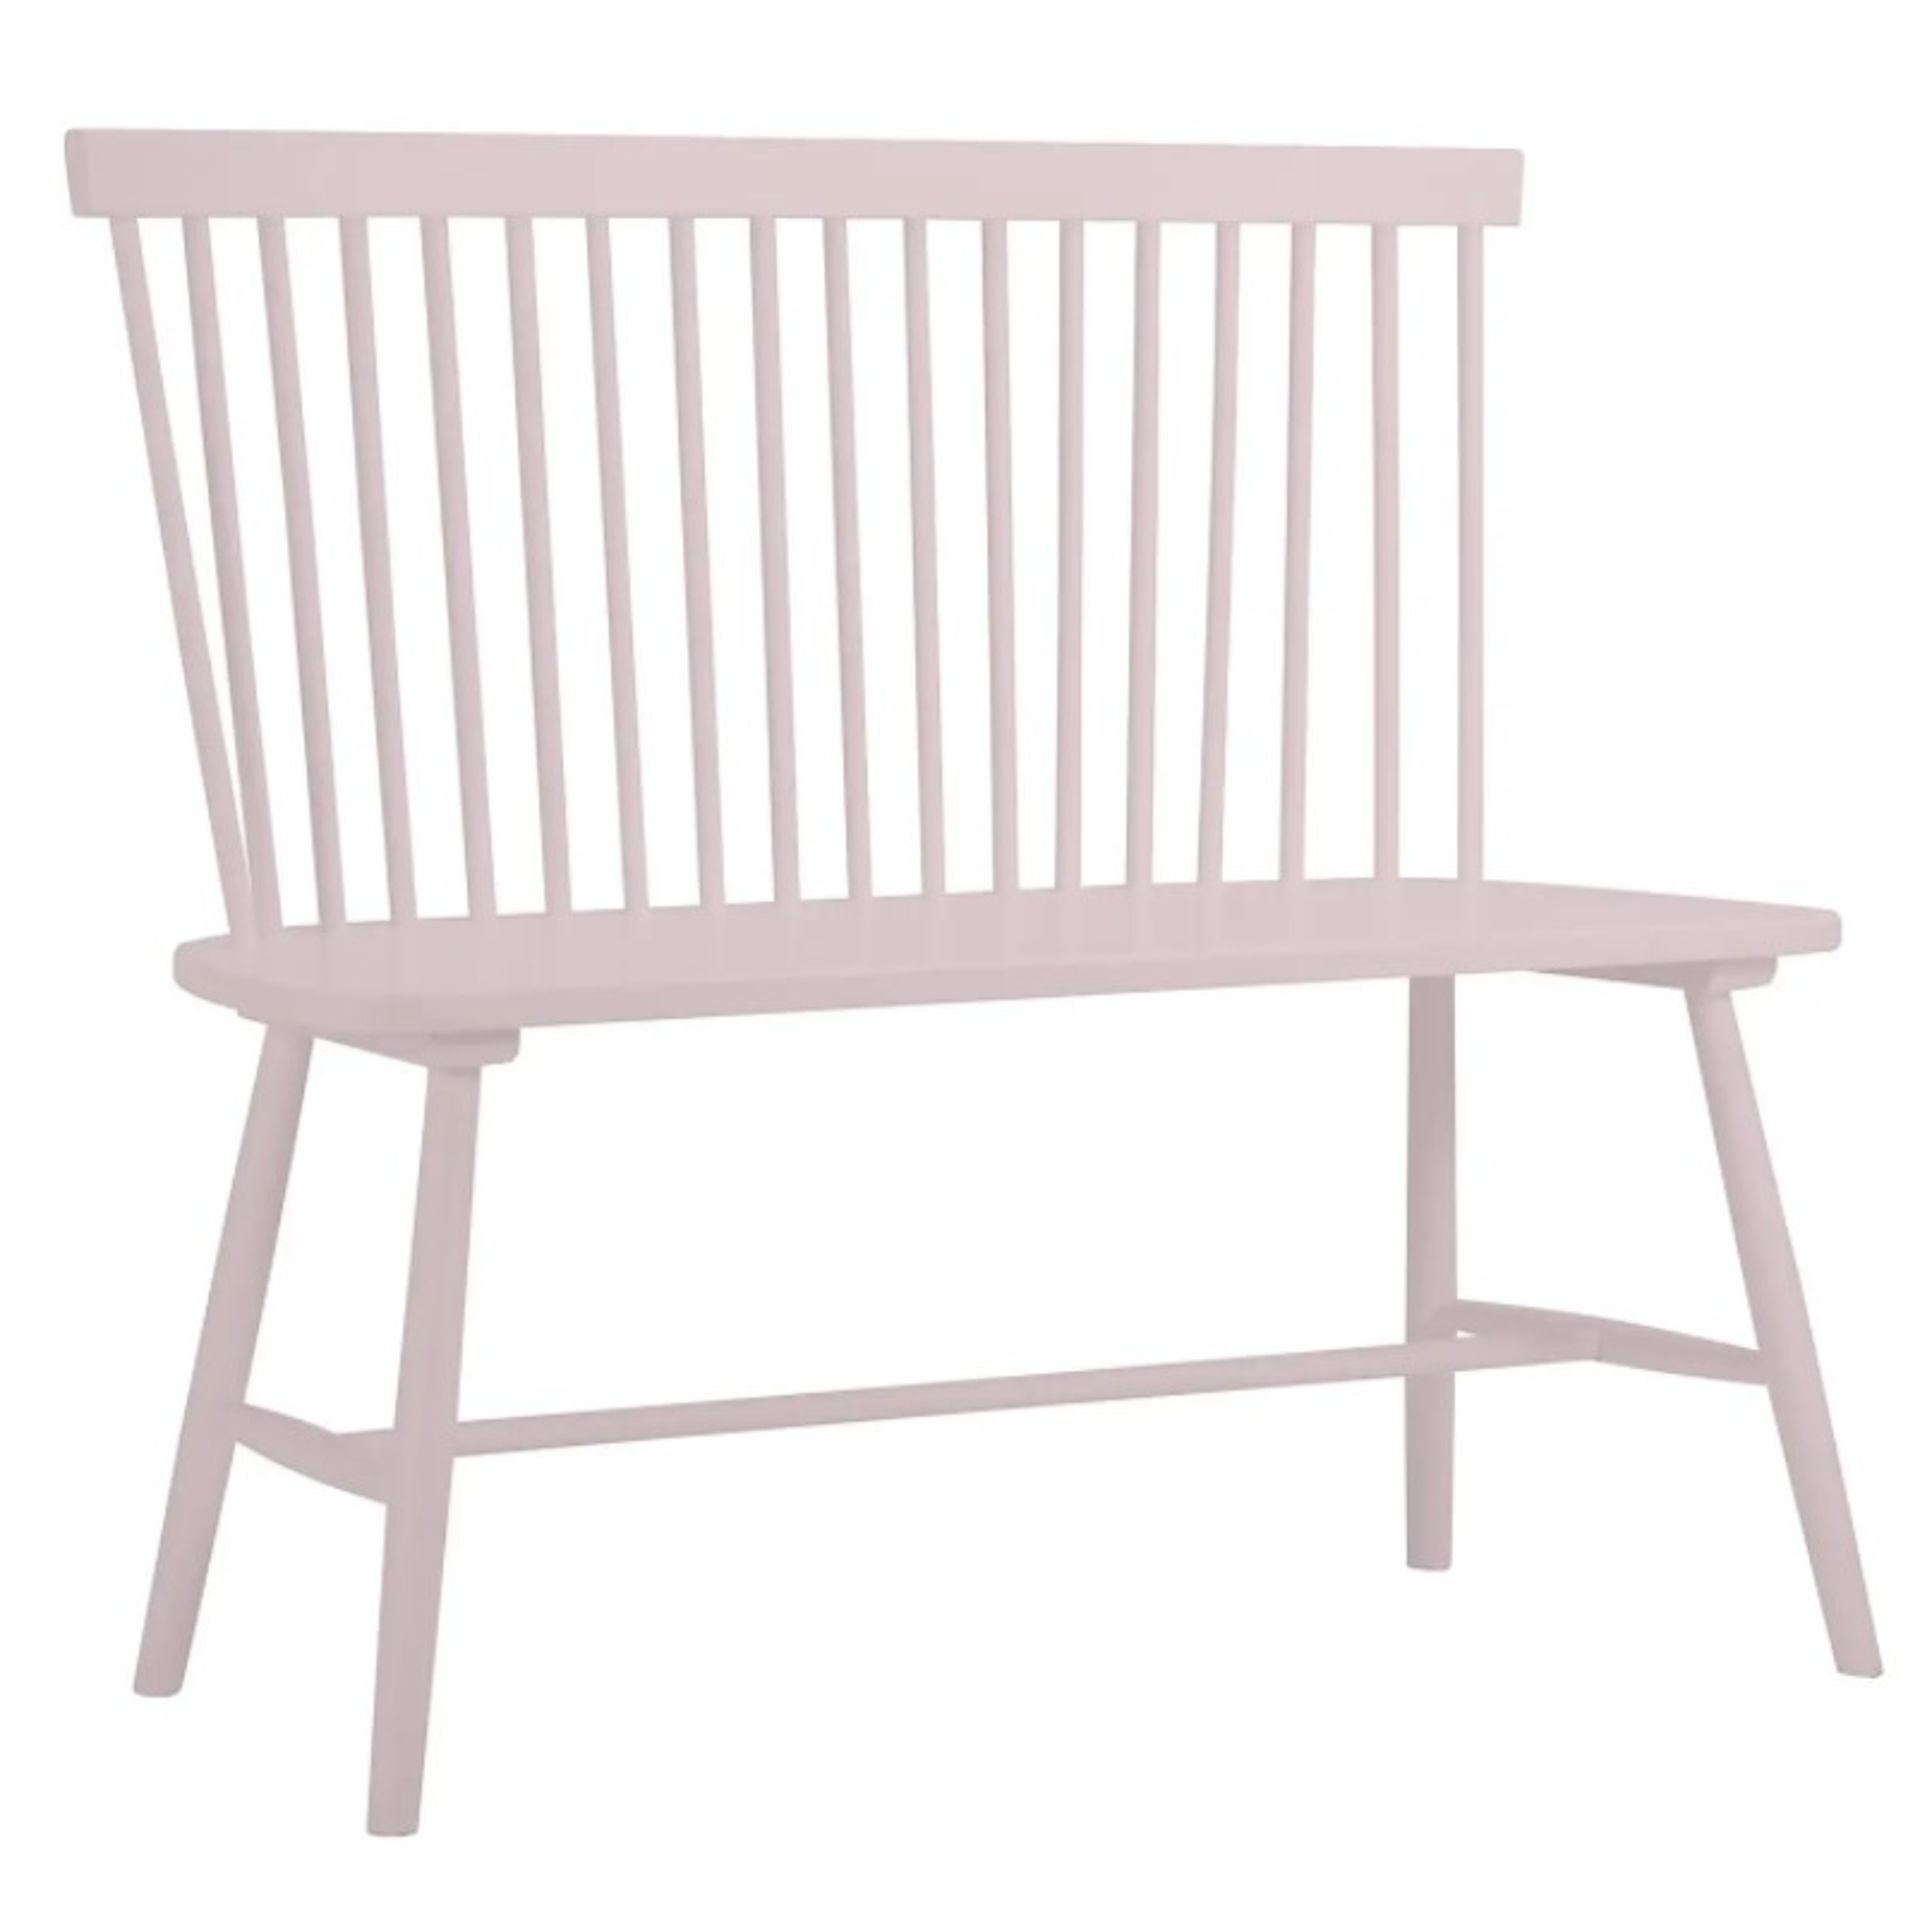 (Mz) 1x Laura Spindle Back Bench Lilac RRP £150. (H89x W100x D44cm)